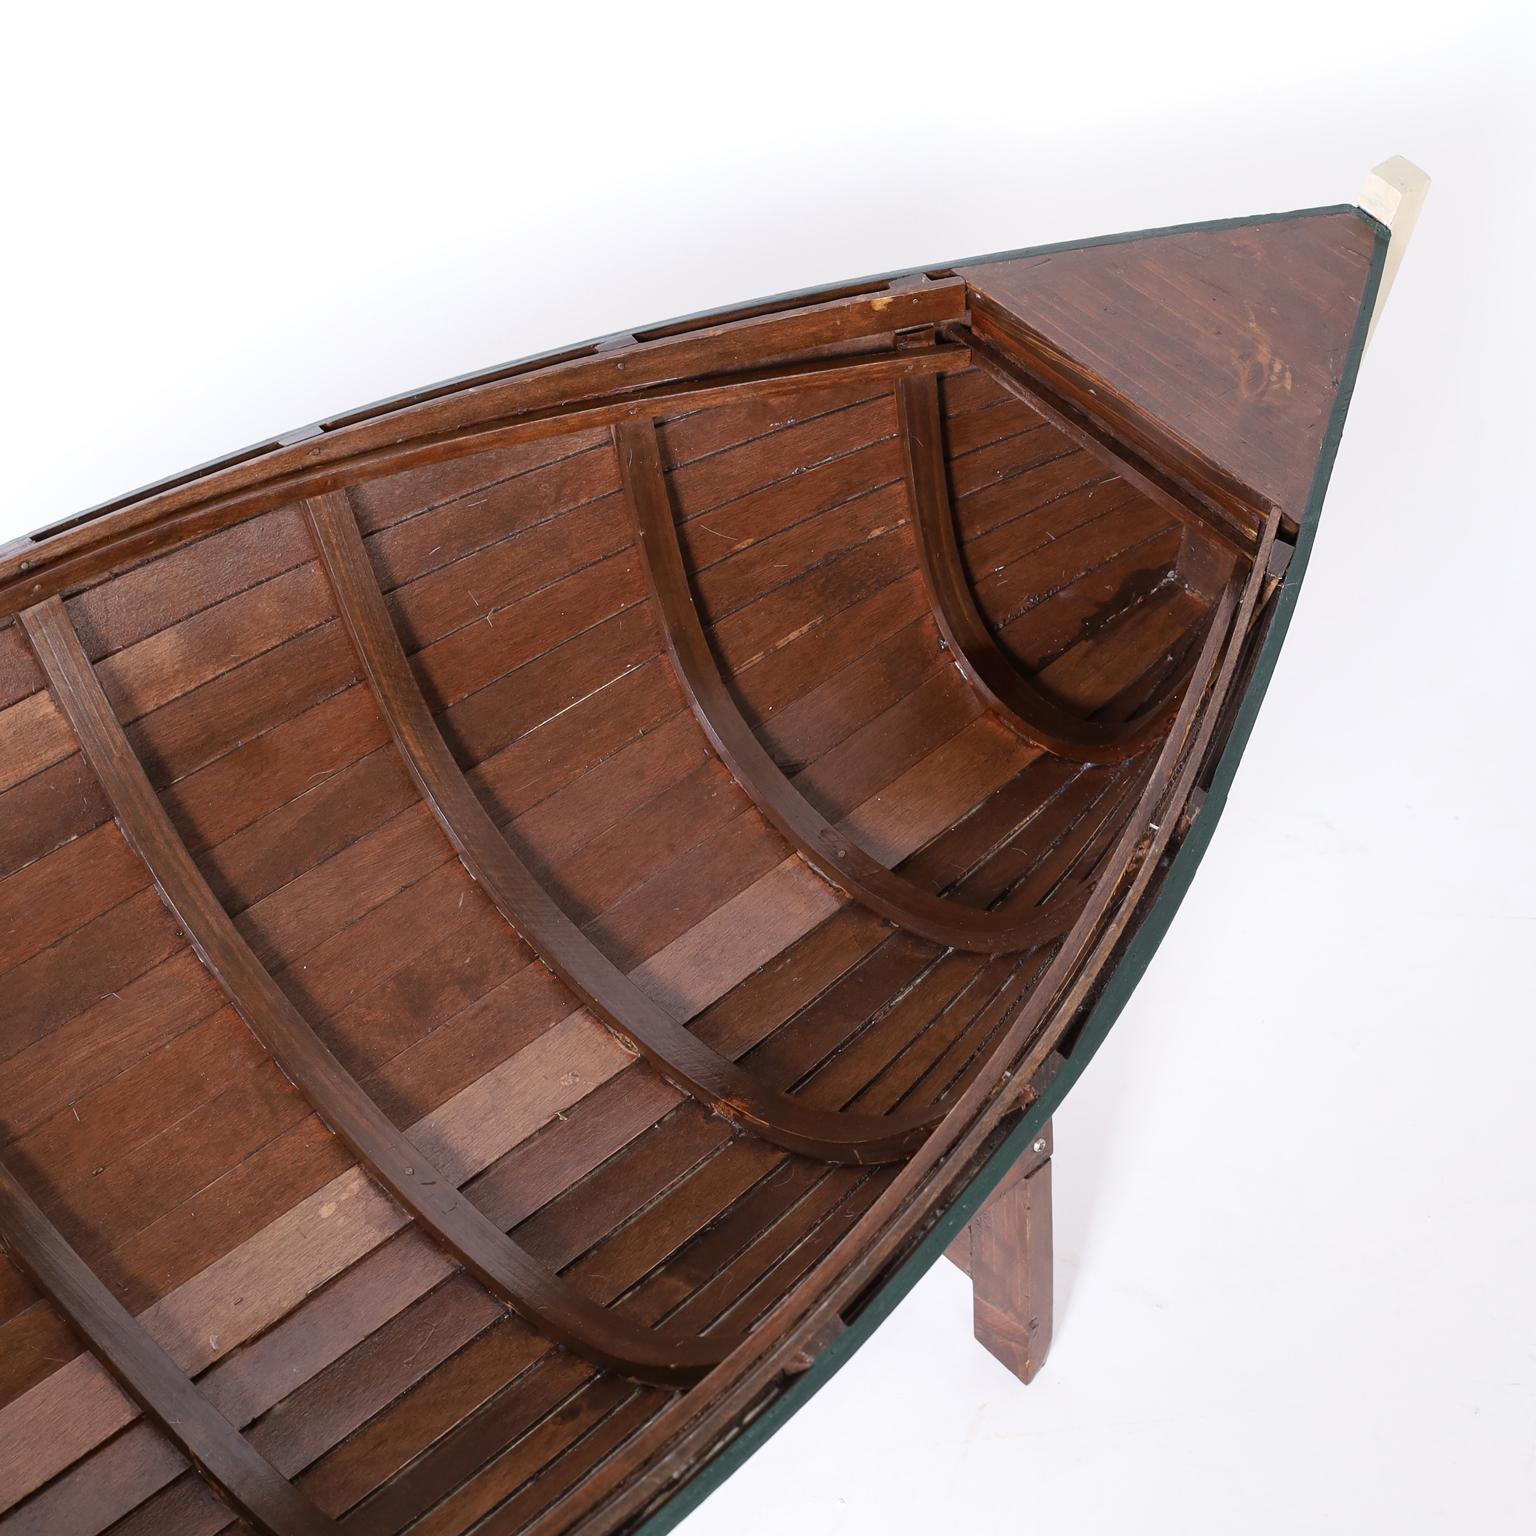 Hand-Crafted Large Row Boat or Dinghy Model For Sale